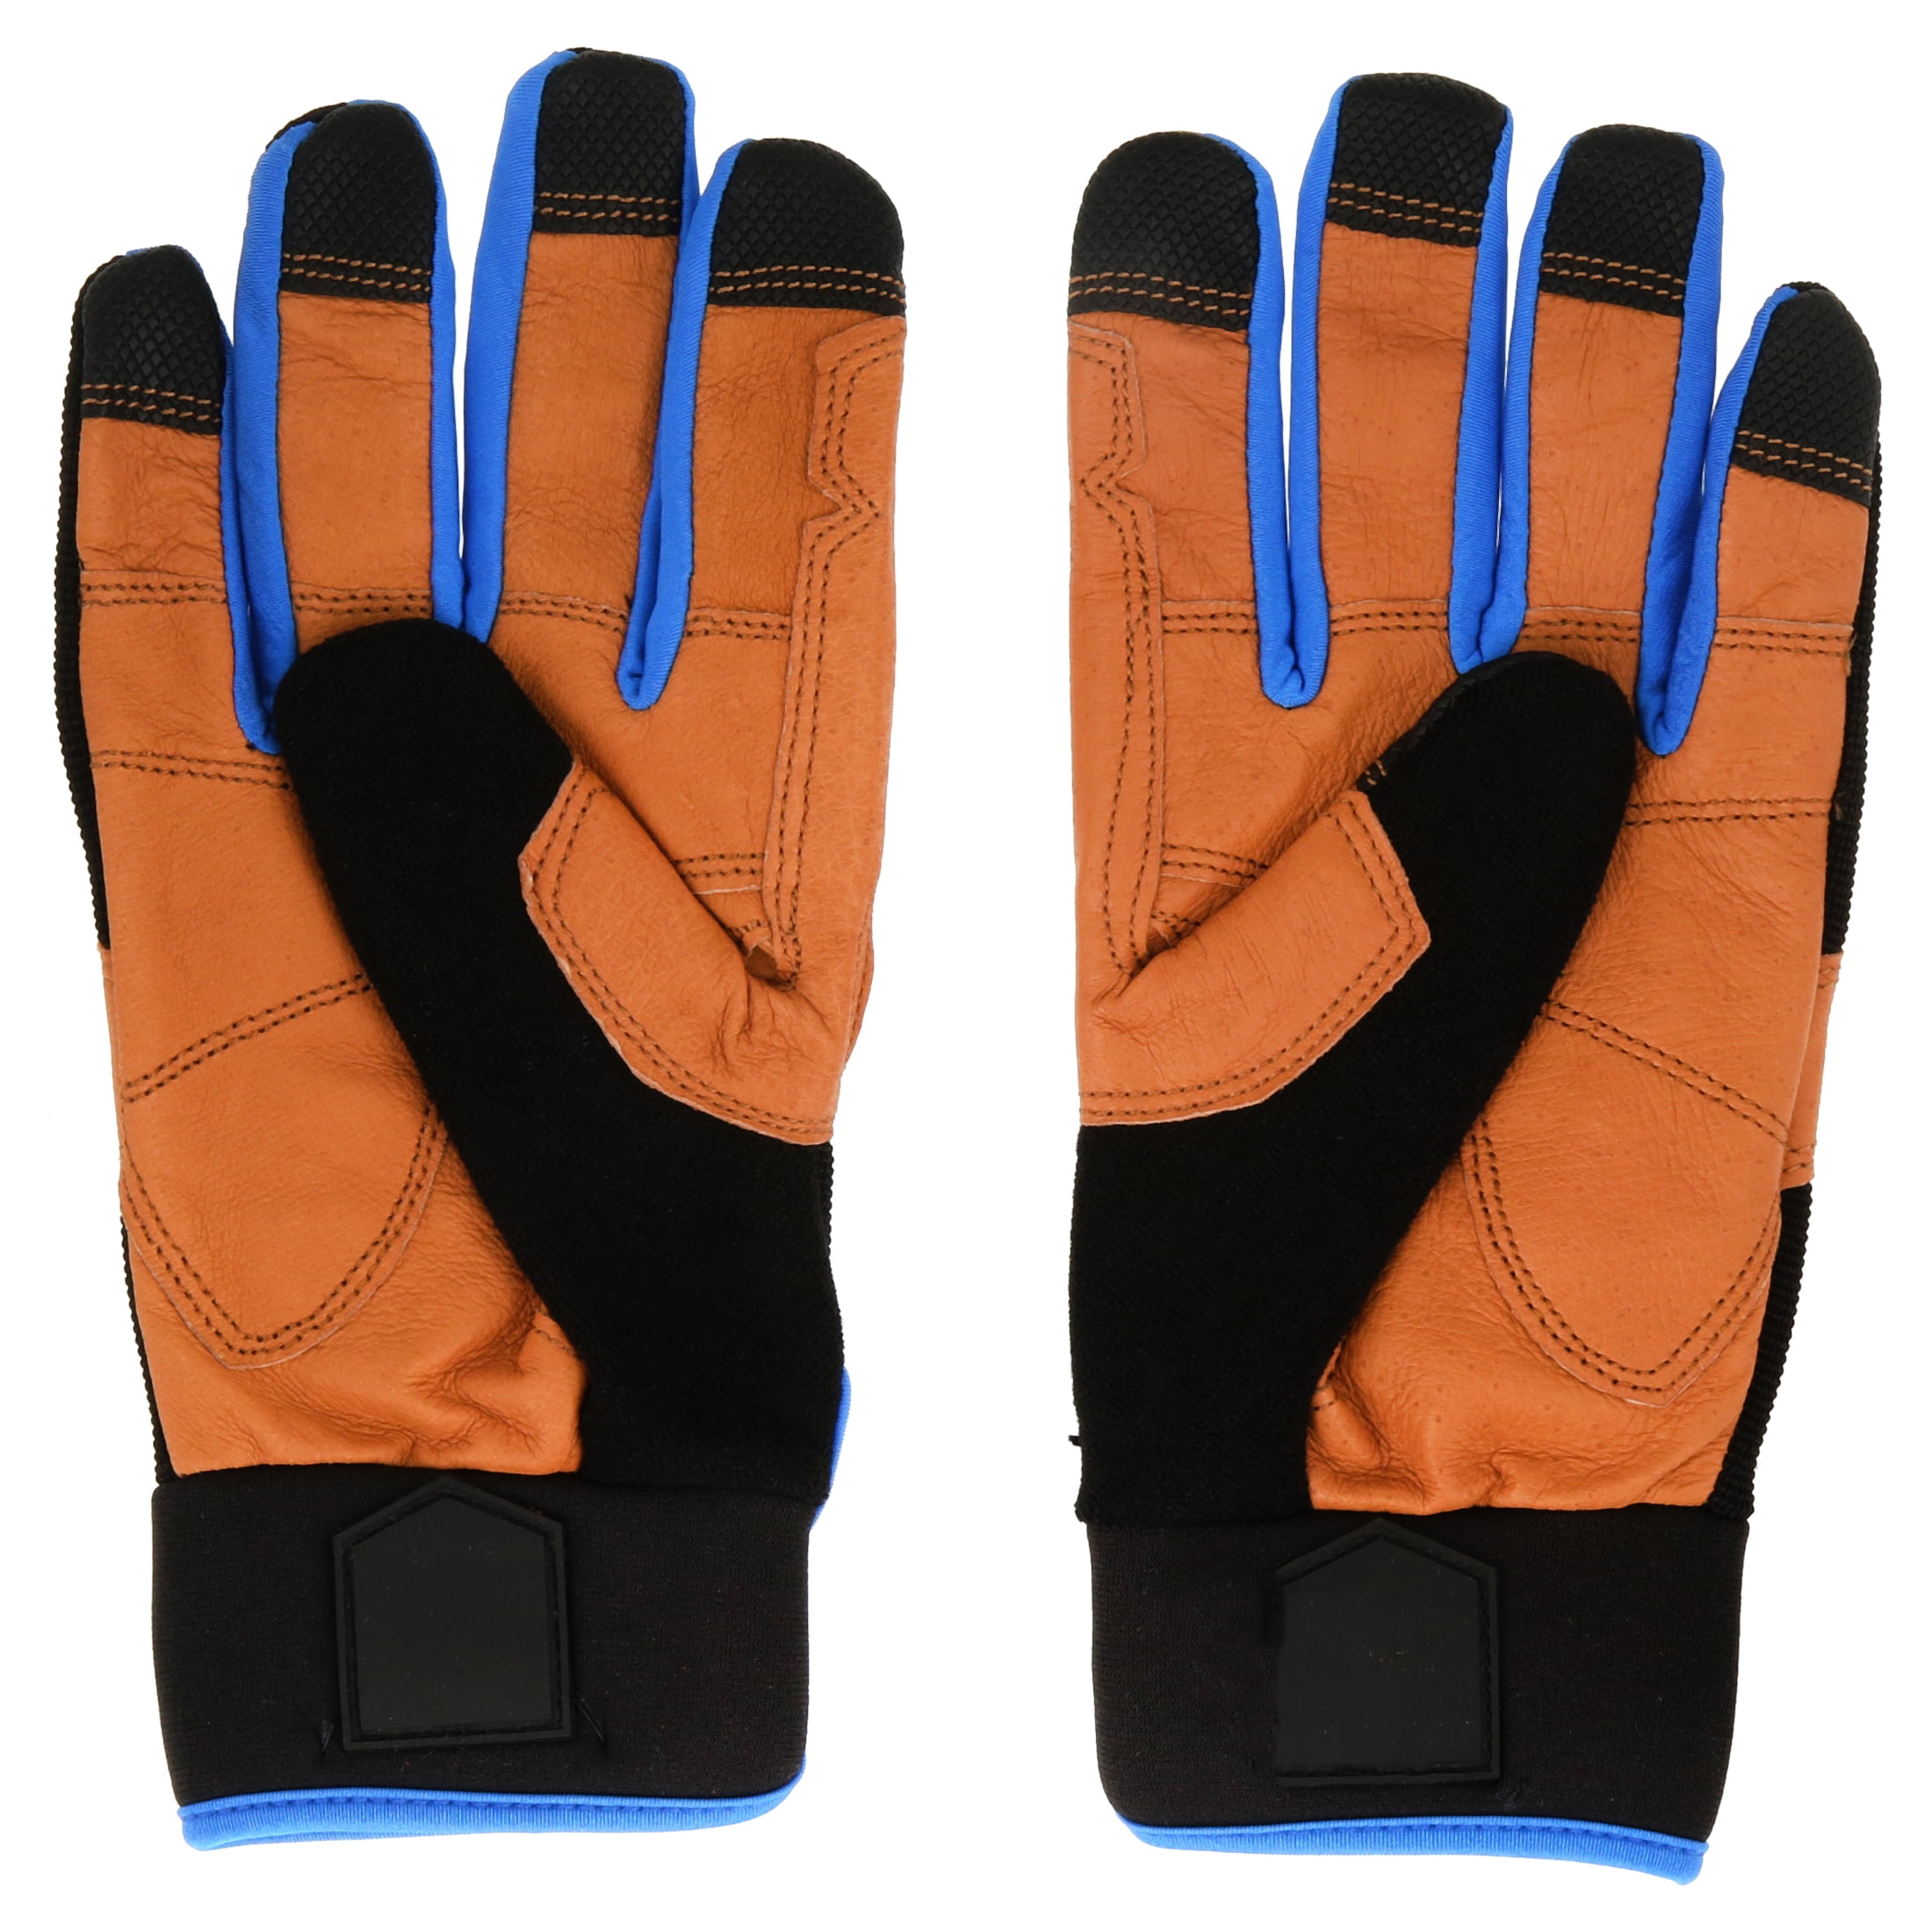 Hart Impact Work Gloves, 5-Finger Touchscreen Capable, Size Large Safety Workwear Gloves, Size: One Size hhppgd2